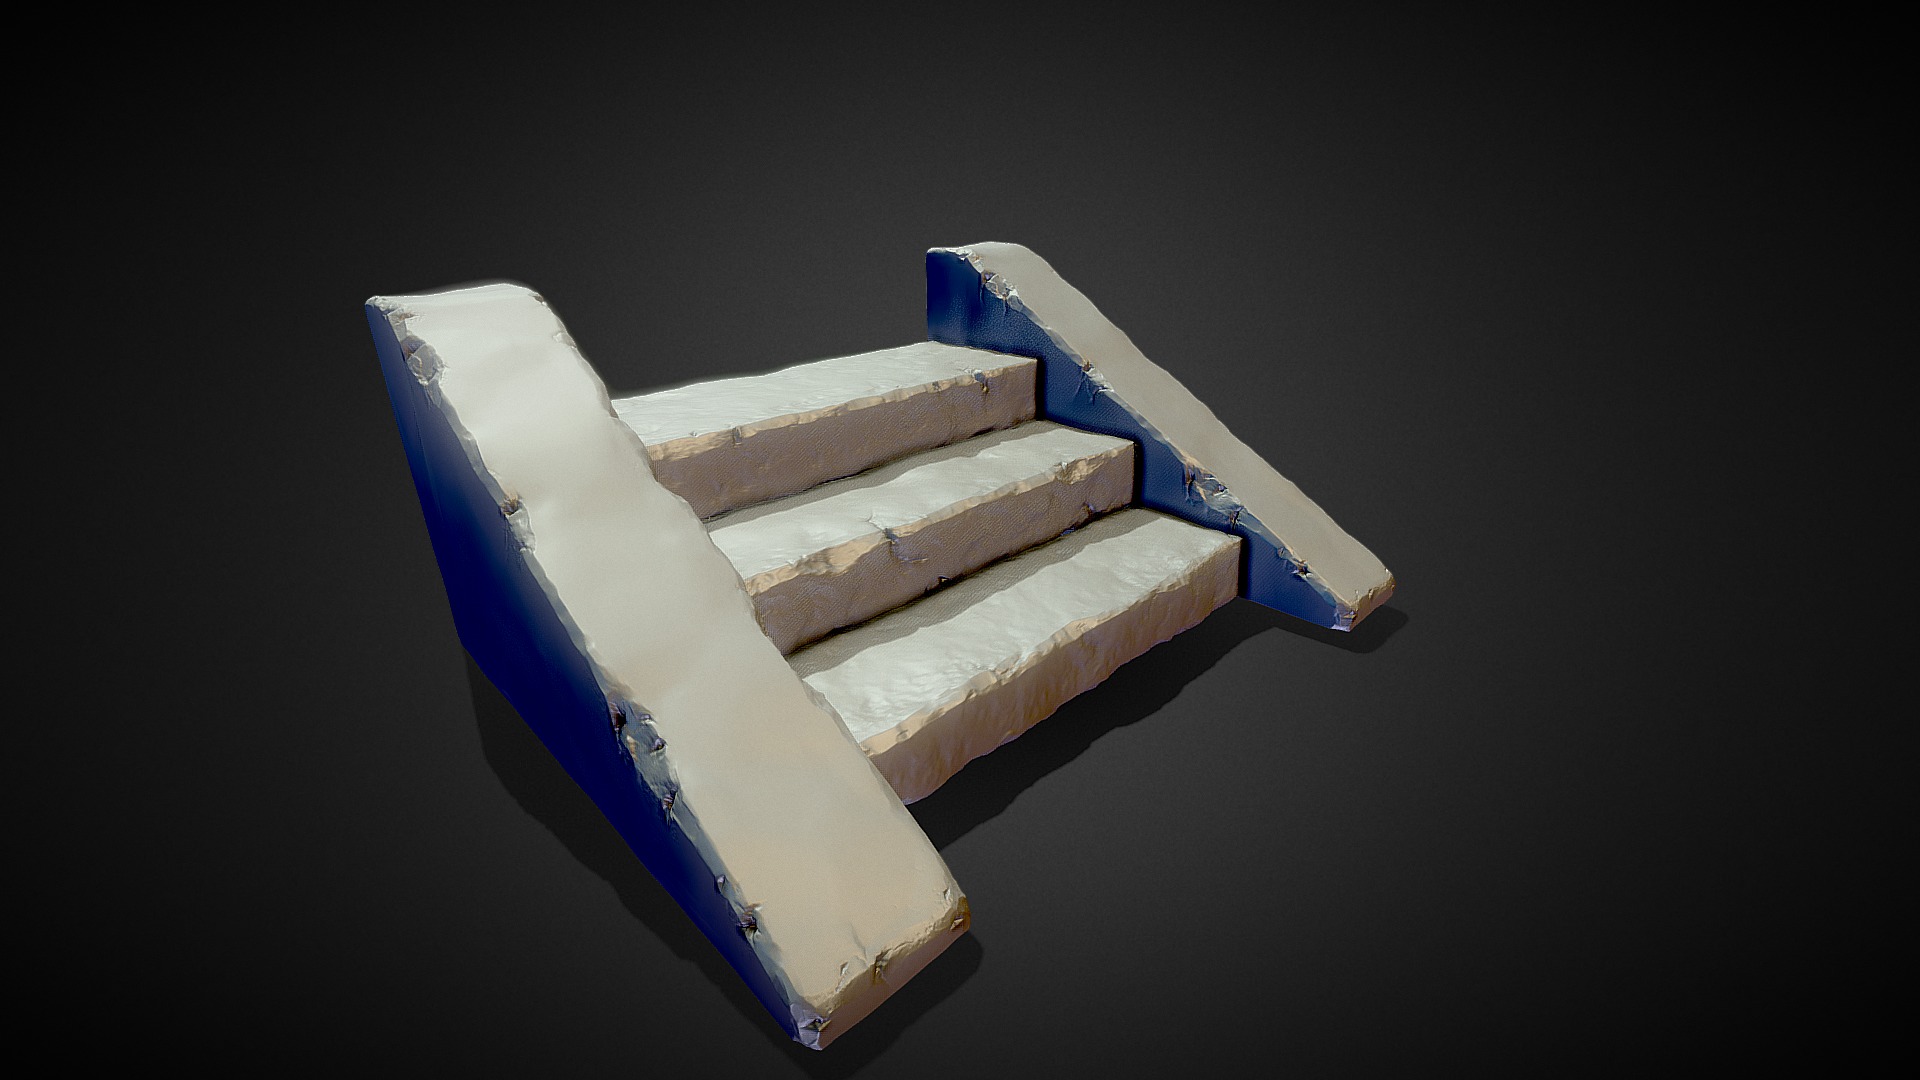 3D model 3D Stone Staircase – High Poly - This is a 3D model of the 3D Stone Staircase - High Poly. The 3D model is about a group of different colored bars.